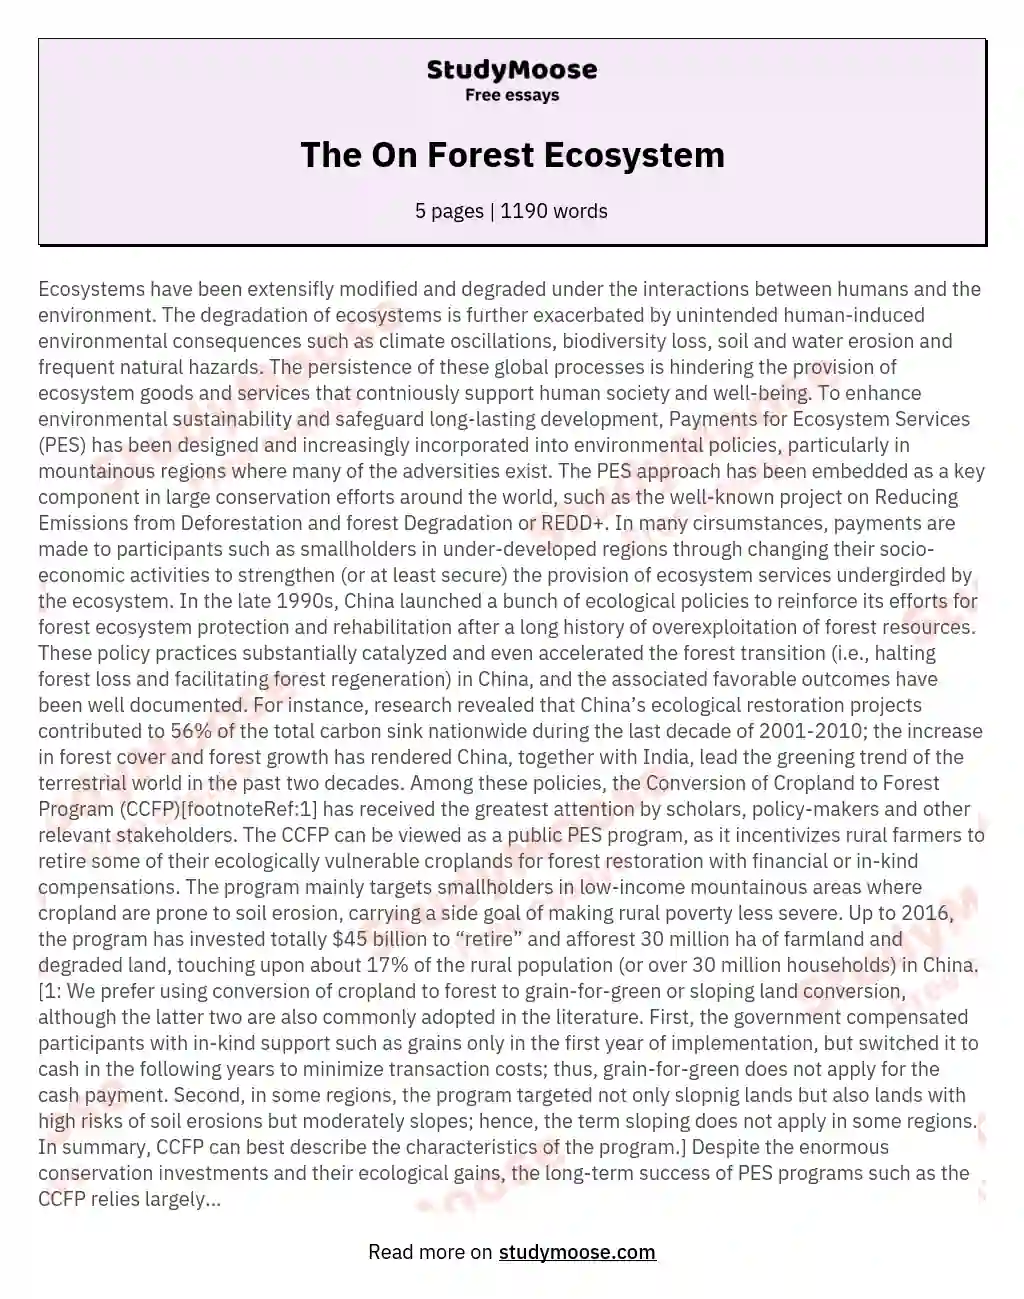 The On Forest Ecosystem essay